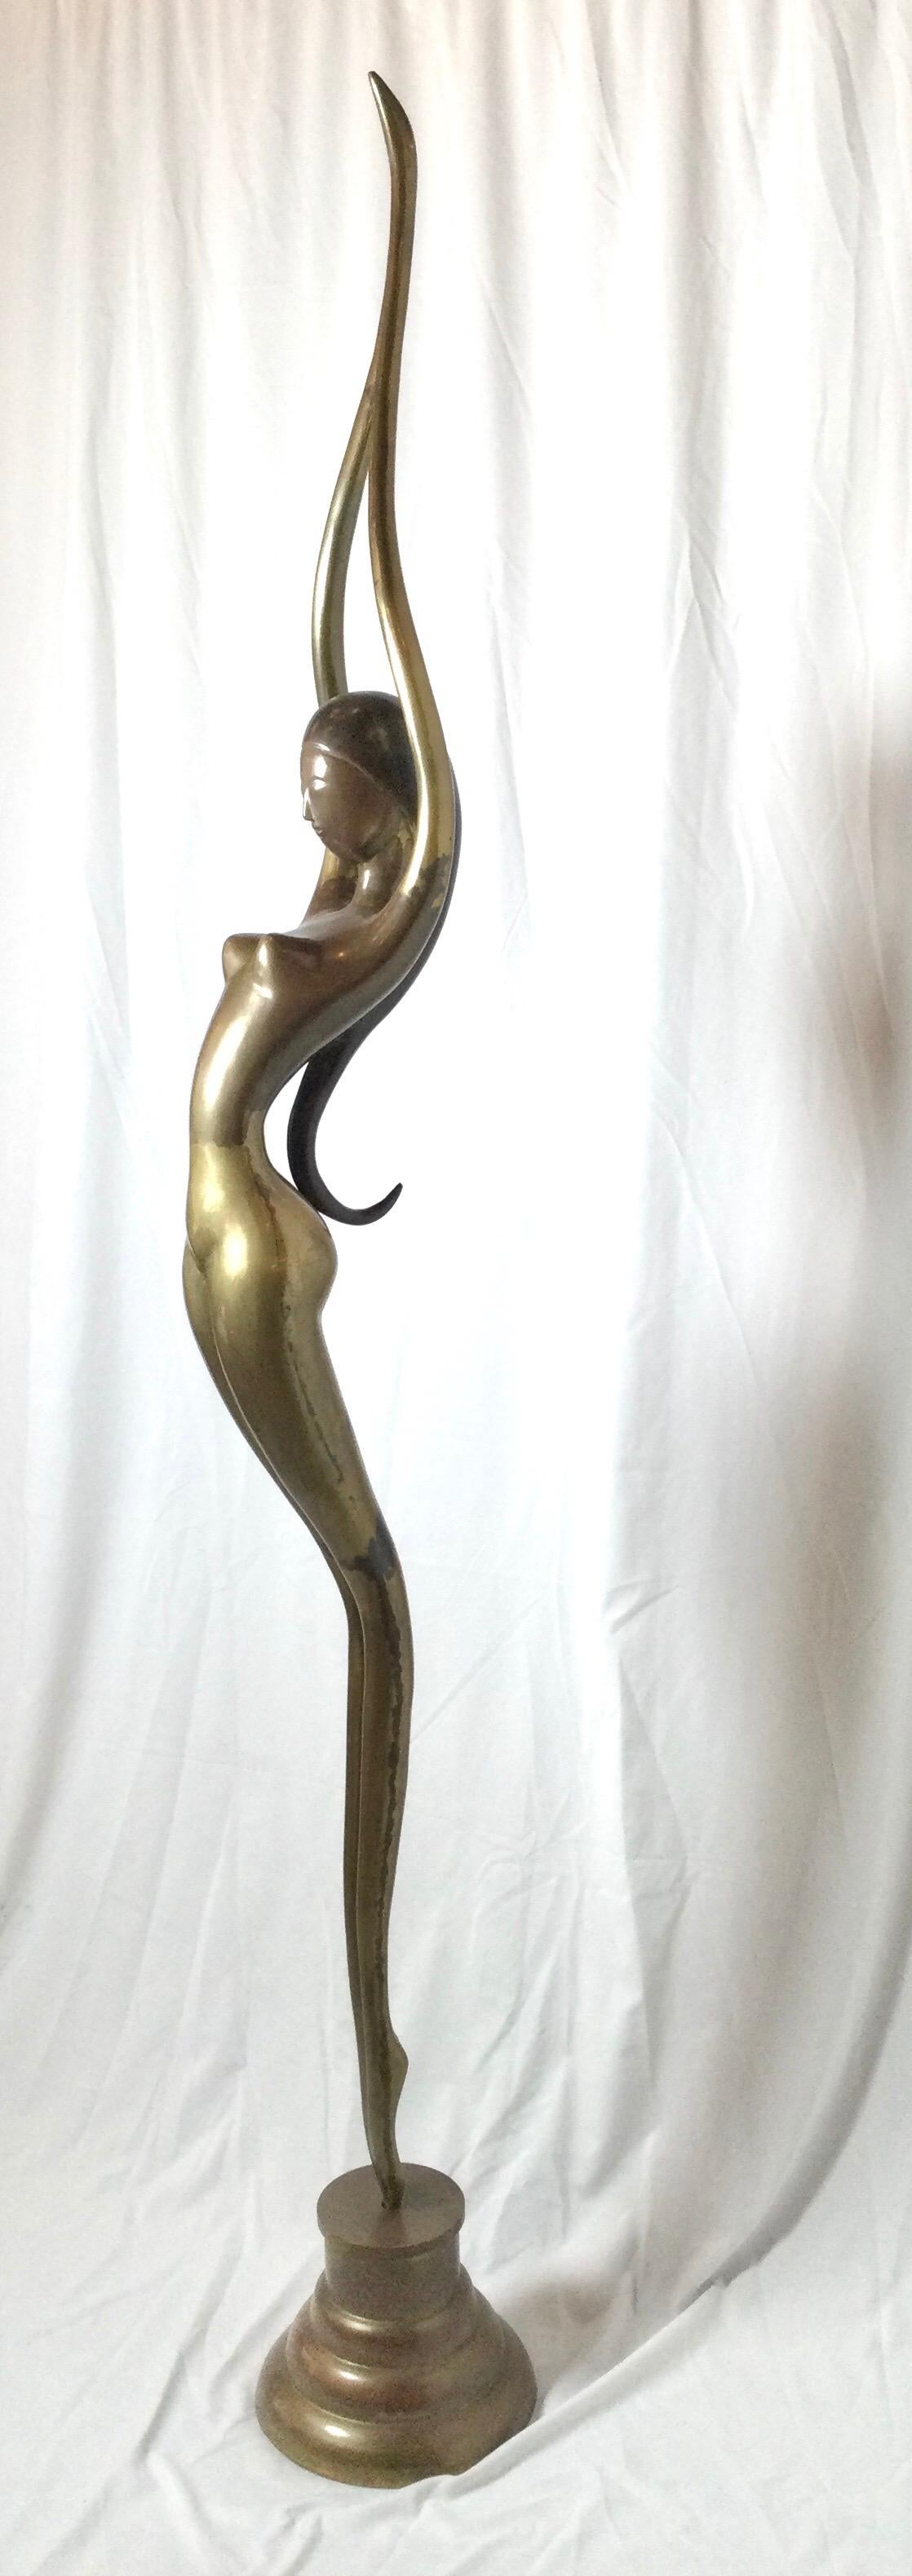 Late 20th Century Tall Art Deco Style Midcentury Brass Sculpture of a Wolman